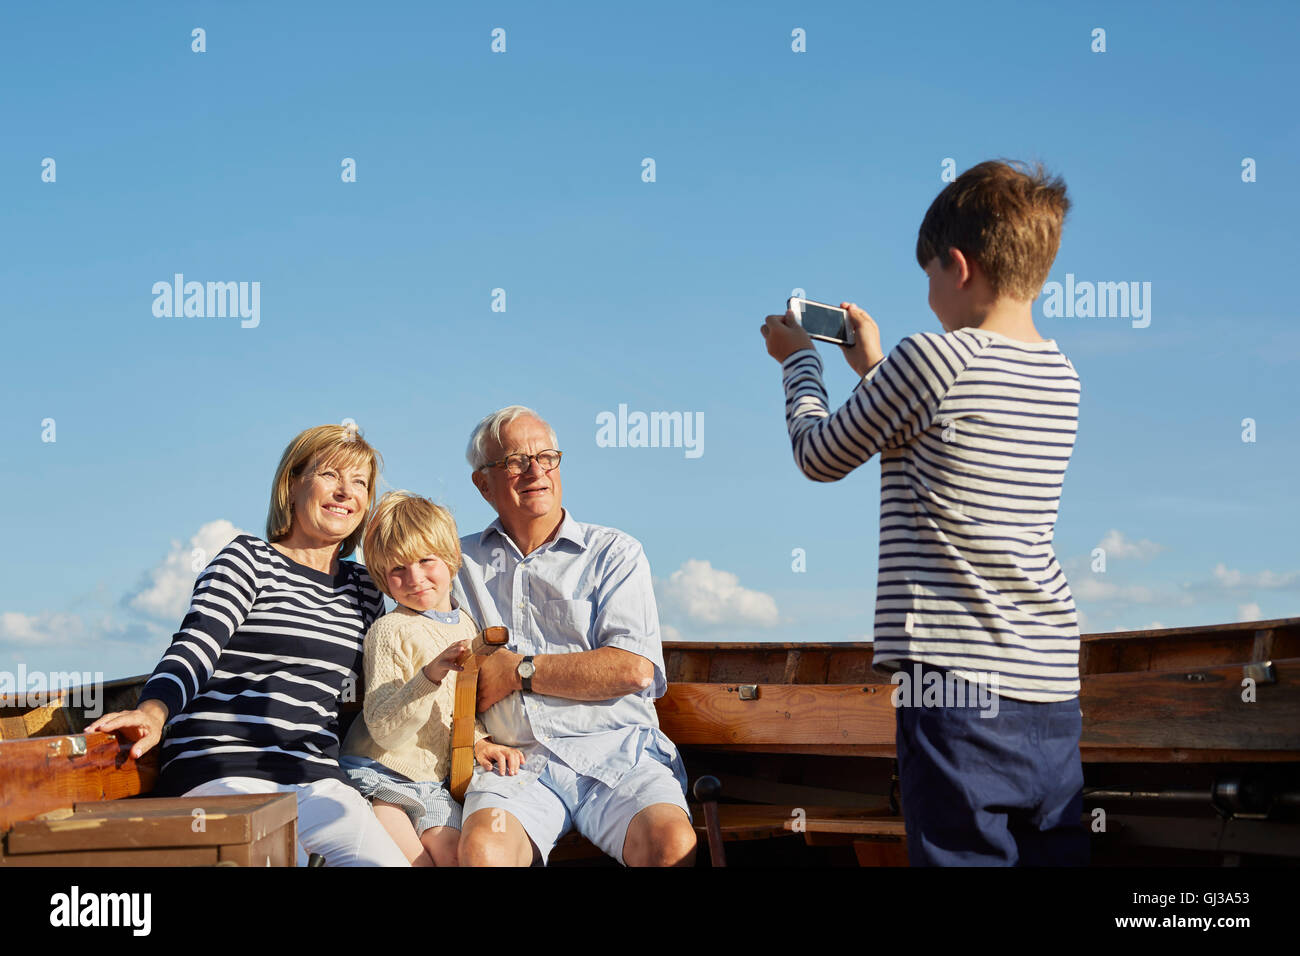 Boy photographing grandparents and brother on boat Stock Photo